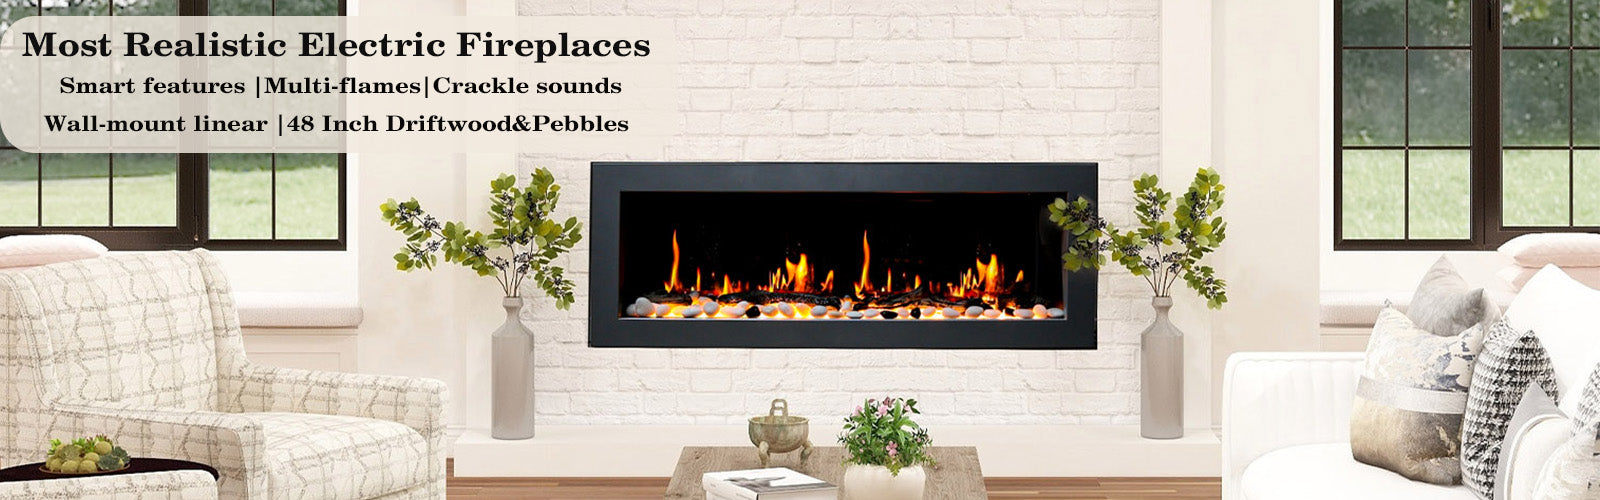 zopaflame 58 inch linear wall mount electric fireplace for living room